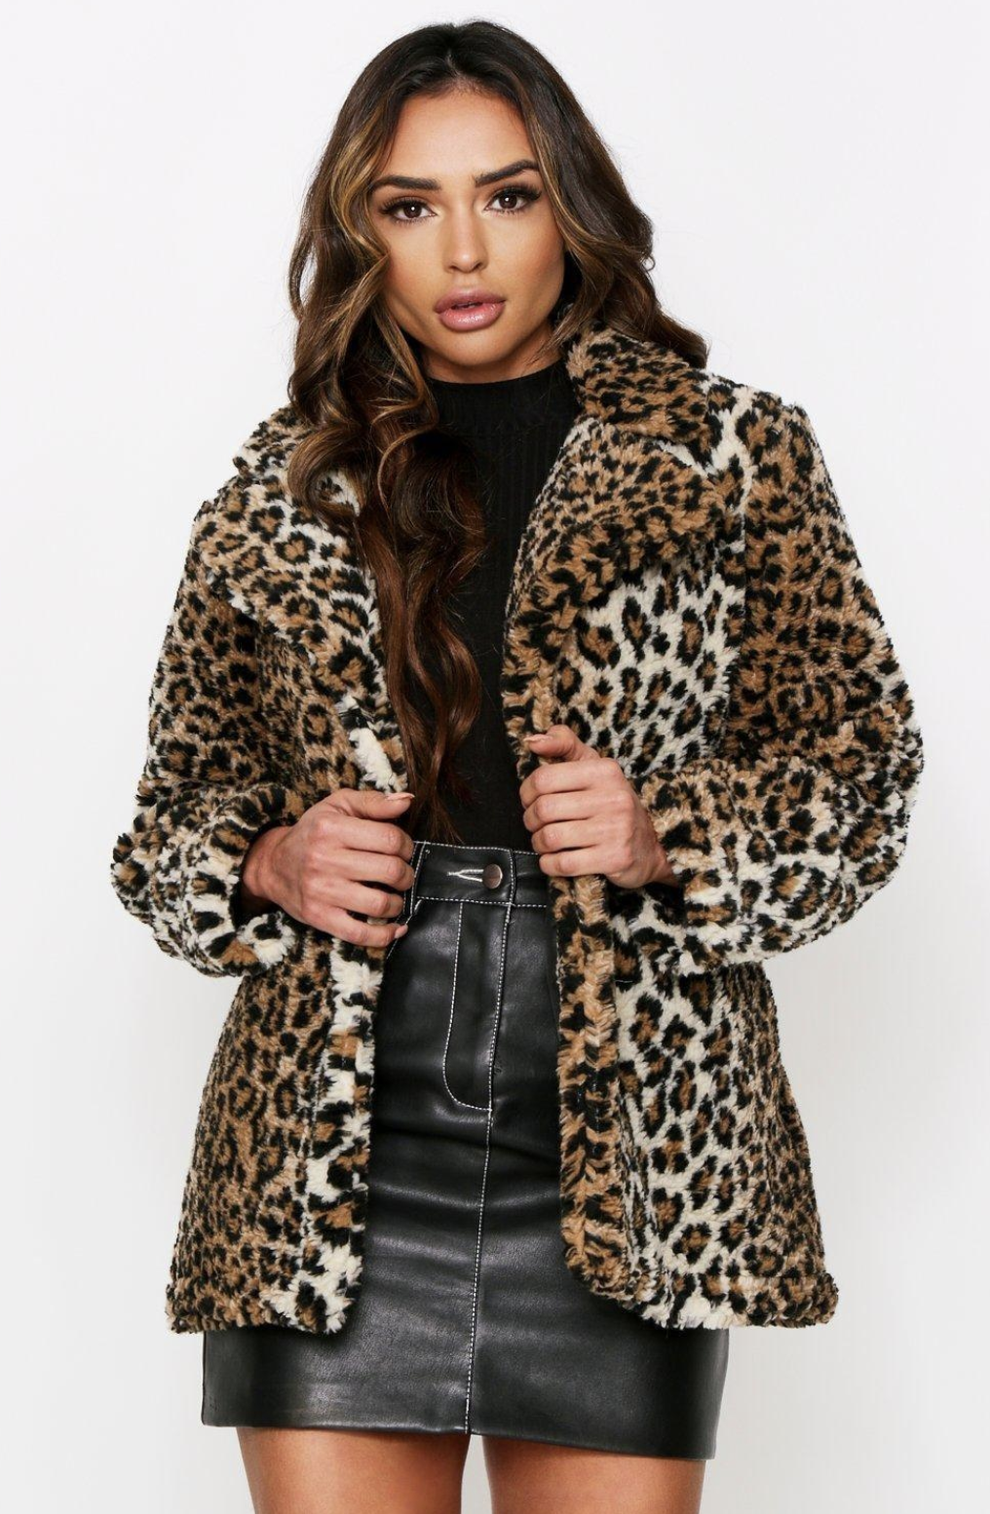 Boohoo Is Having A Sale Right Now And I'm Just Saying, Some Of Their ...